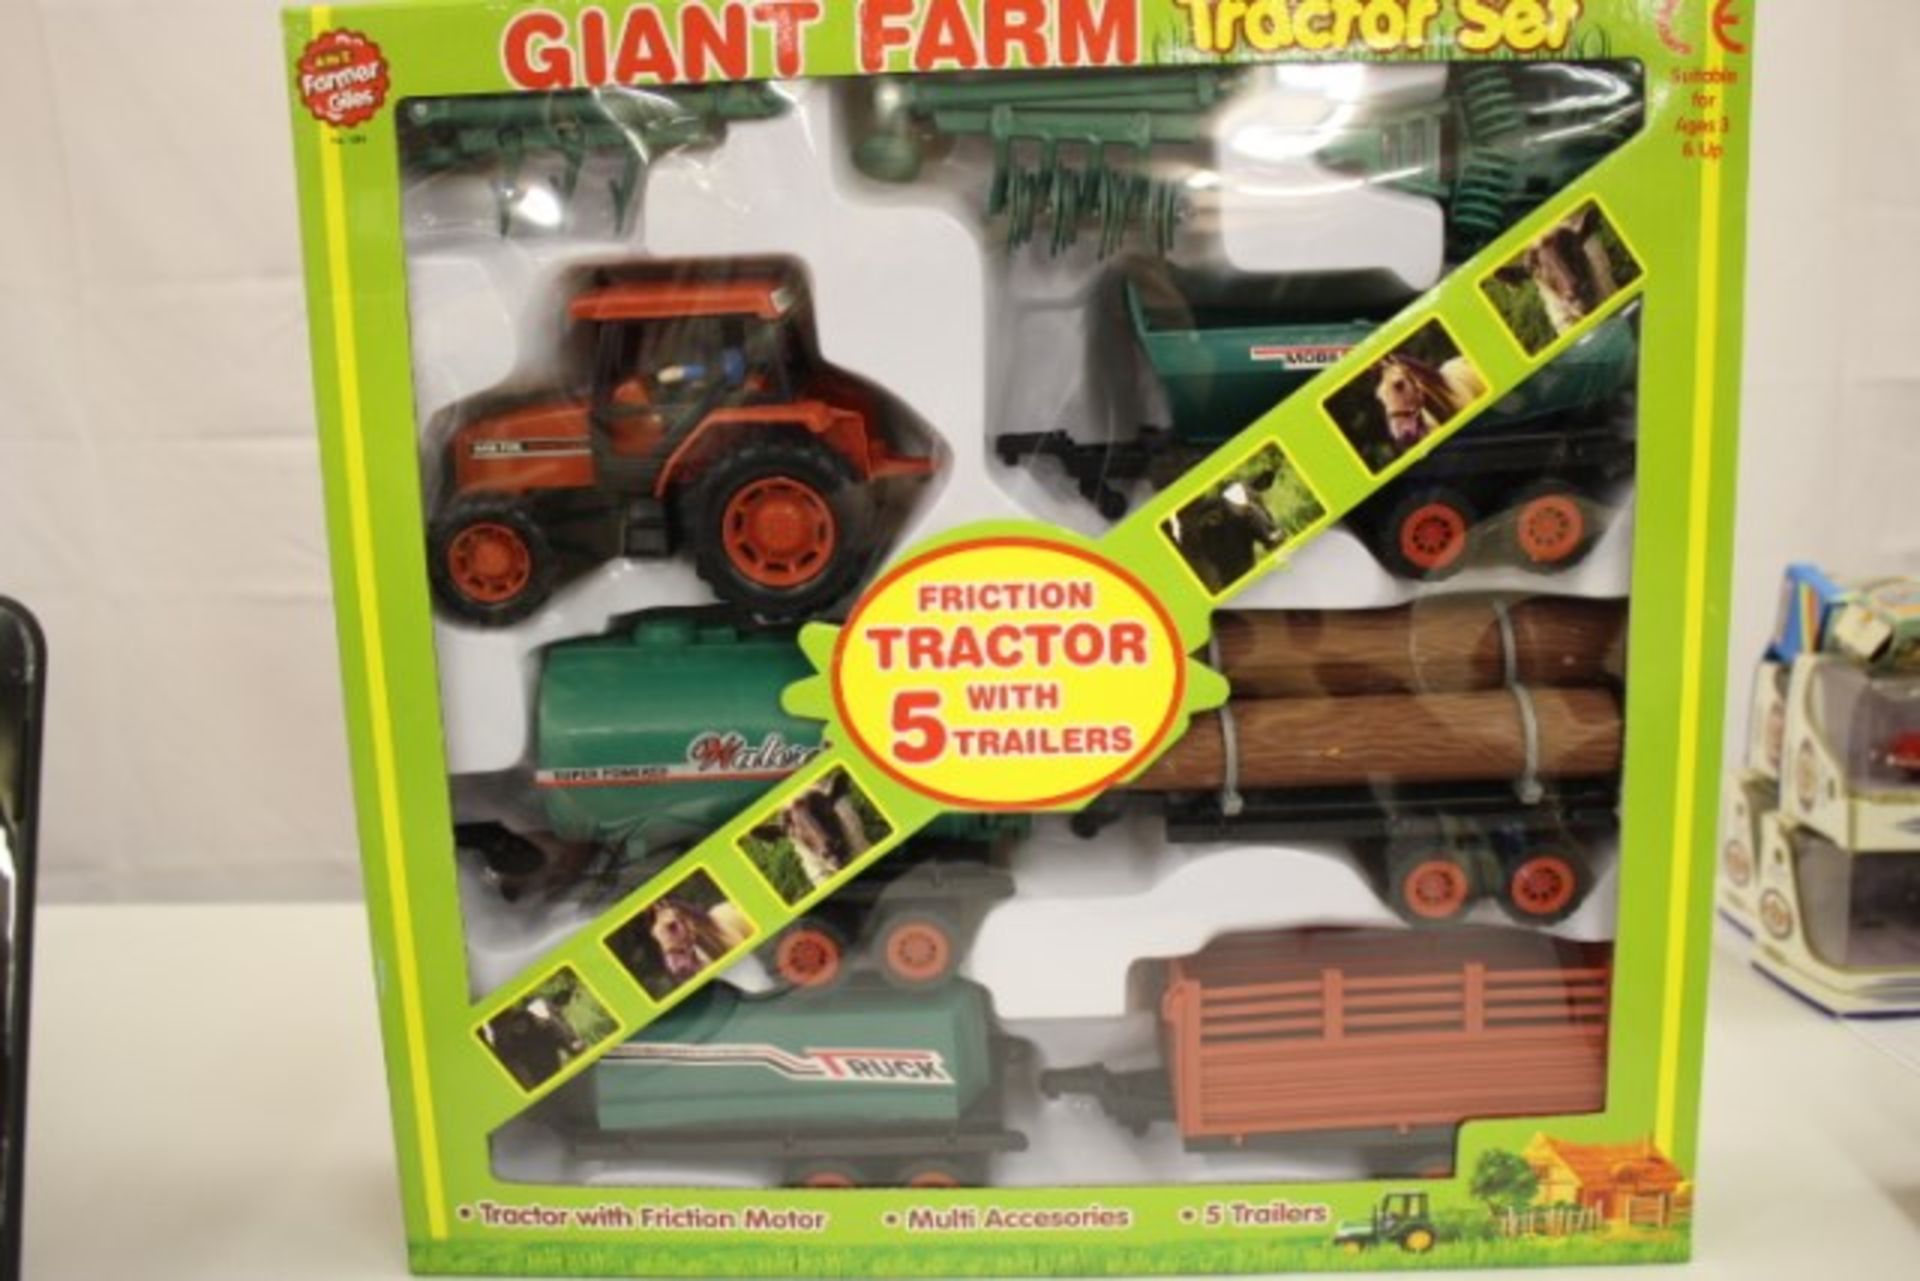 V *TRADE QTY* Brand New Giant Farm Tractor Set SRP £19.99 X 5 YOUR BID PRICE TO BE MULTIPLIED BY